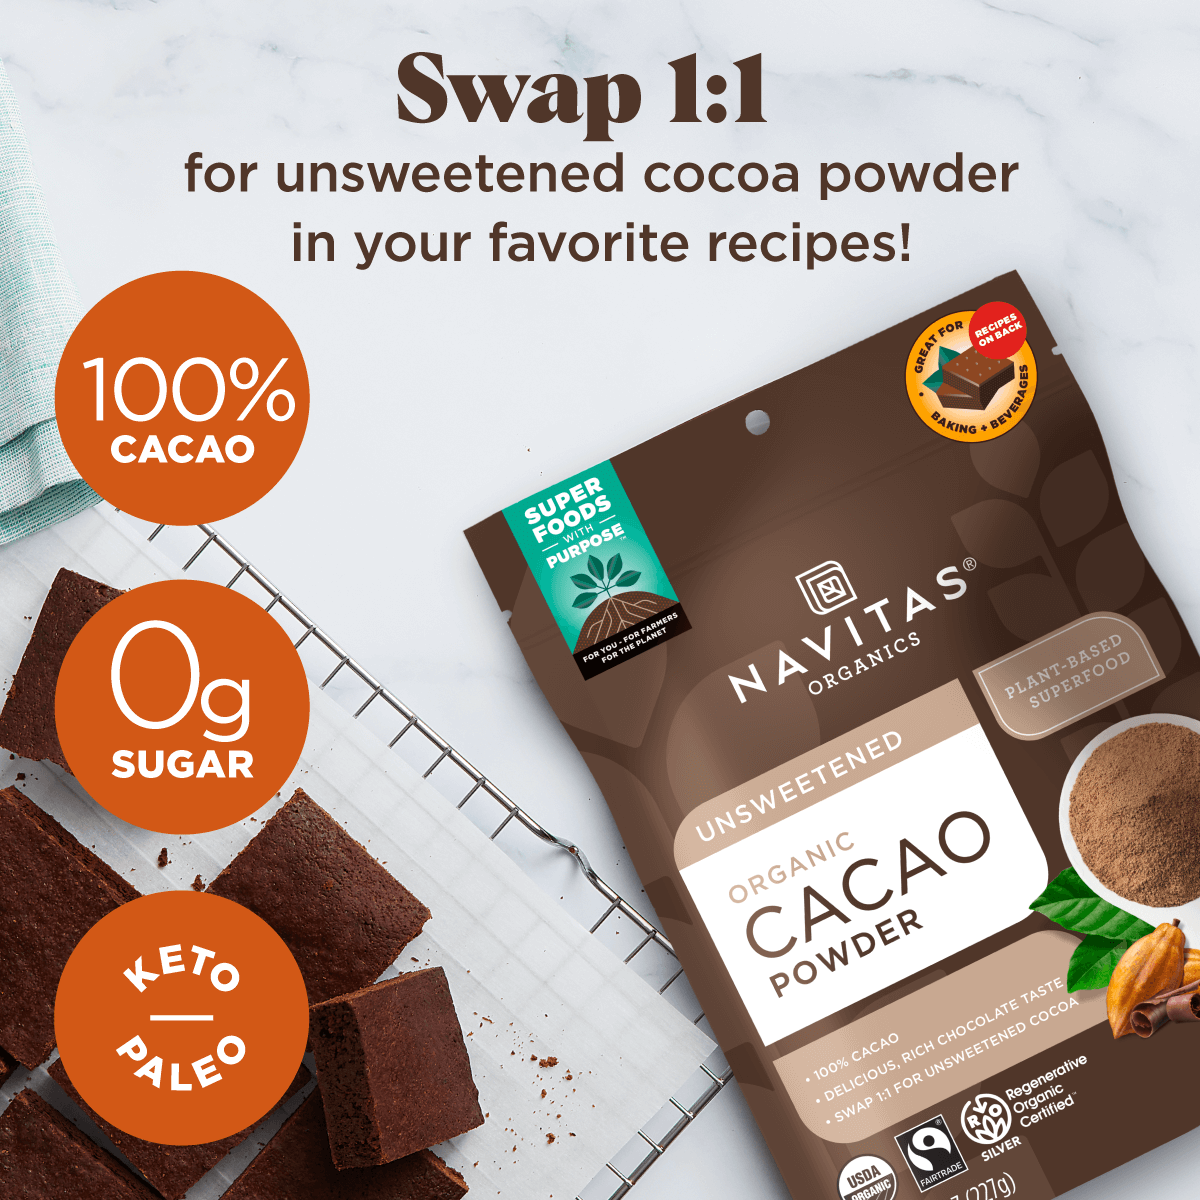 Swap 1:1 for unsweetened cocoa powder in your favorite recipes! 100% cacao. 0g sugar. Keto and Paleo.